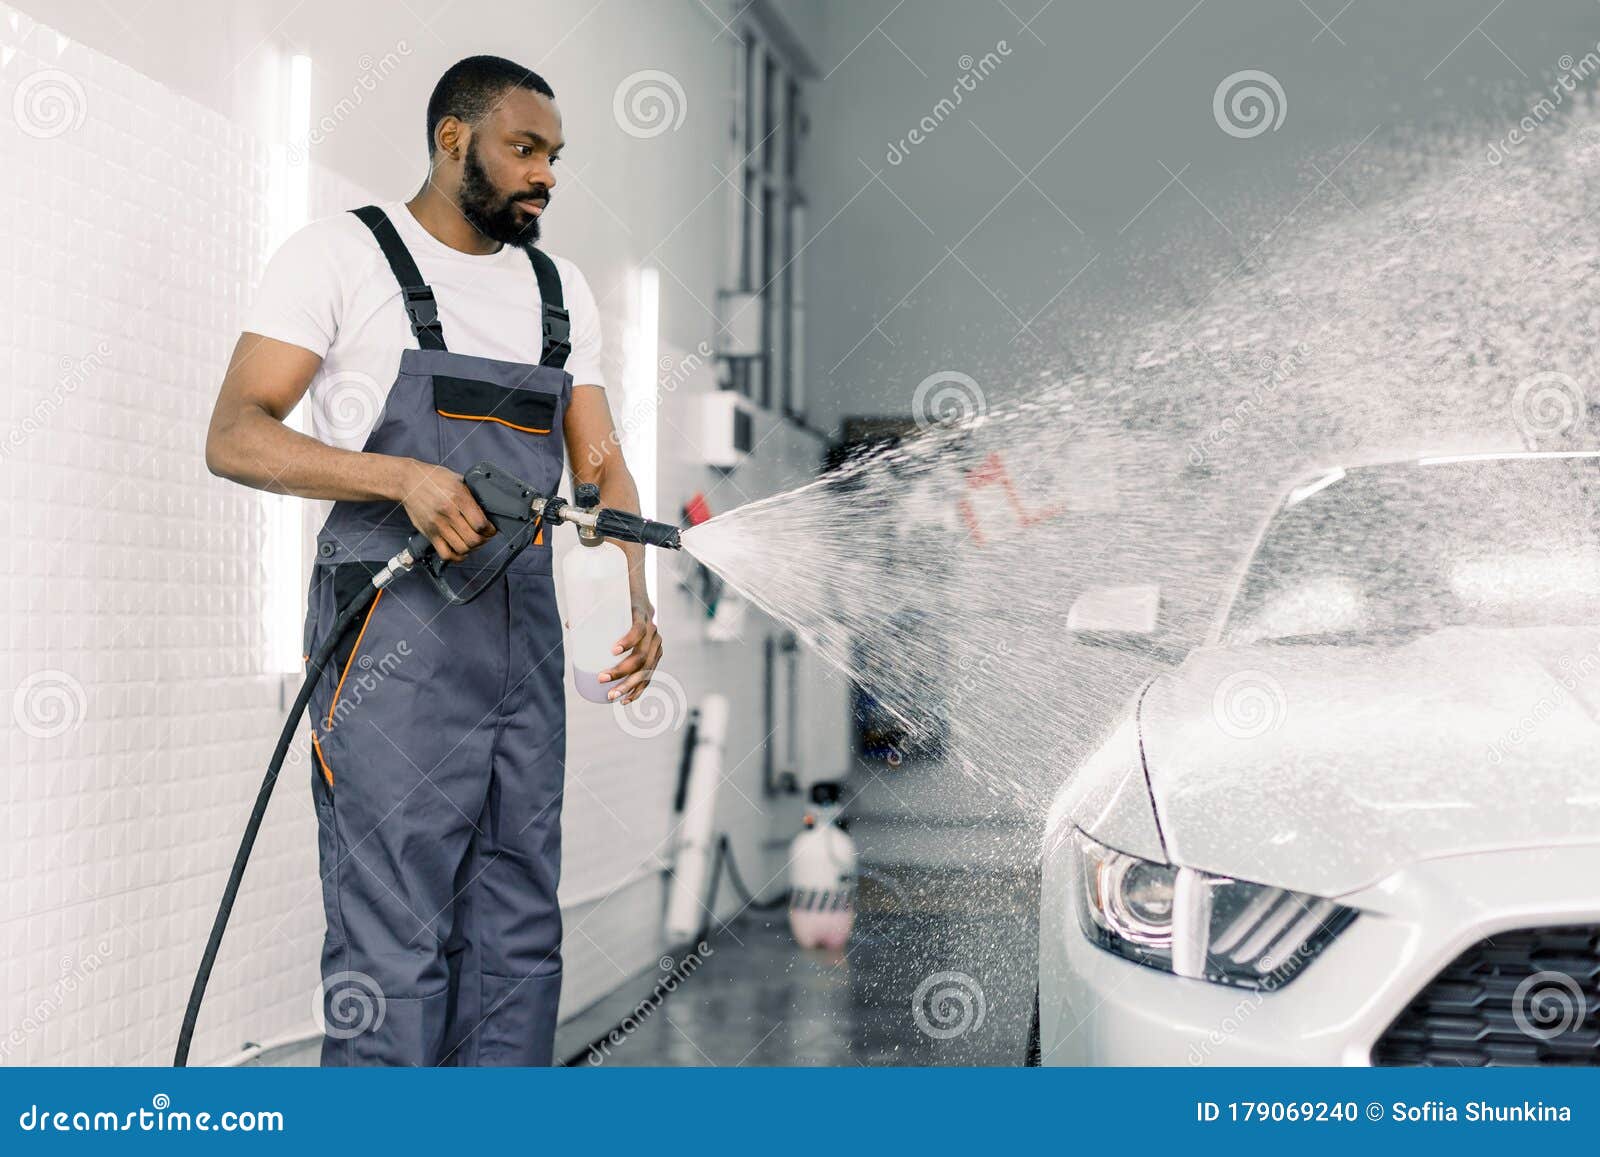 African American Man, Car Wash Worker Is Spraying Cleaning Foam To A